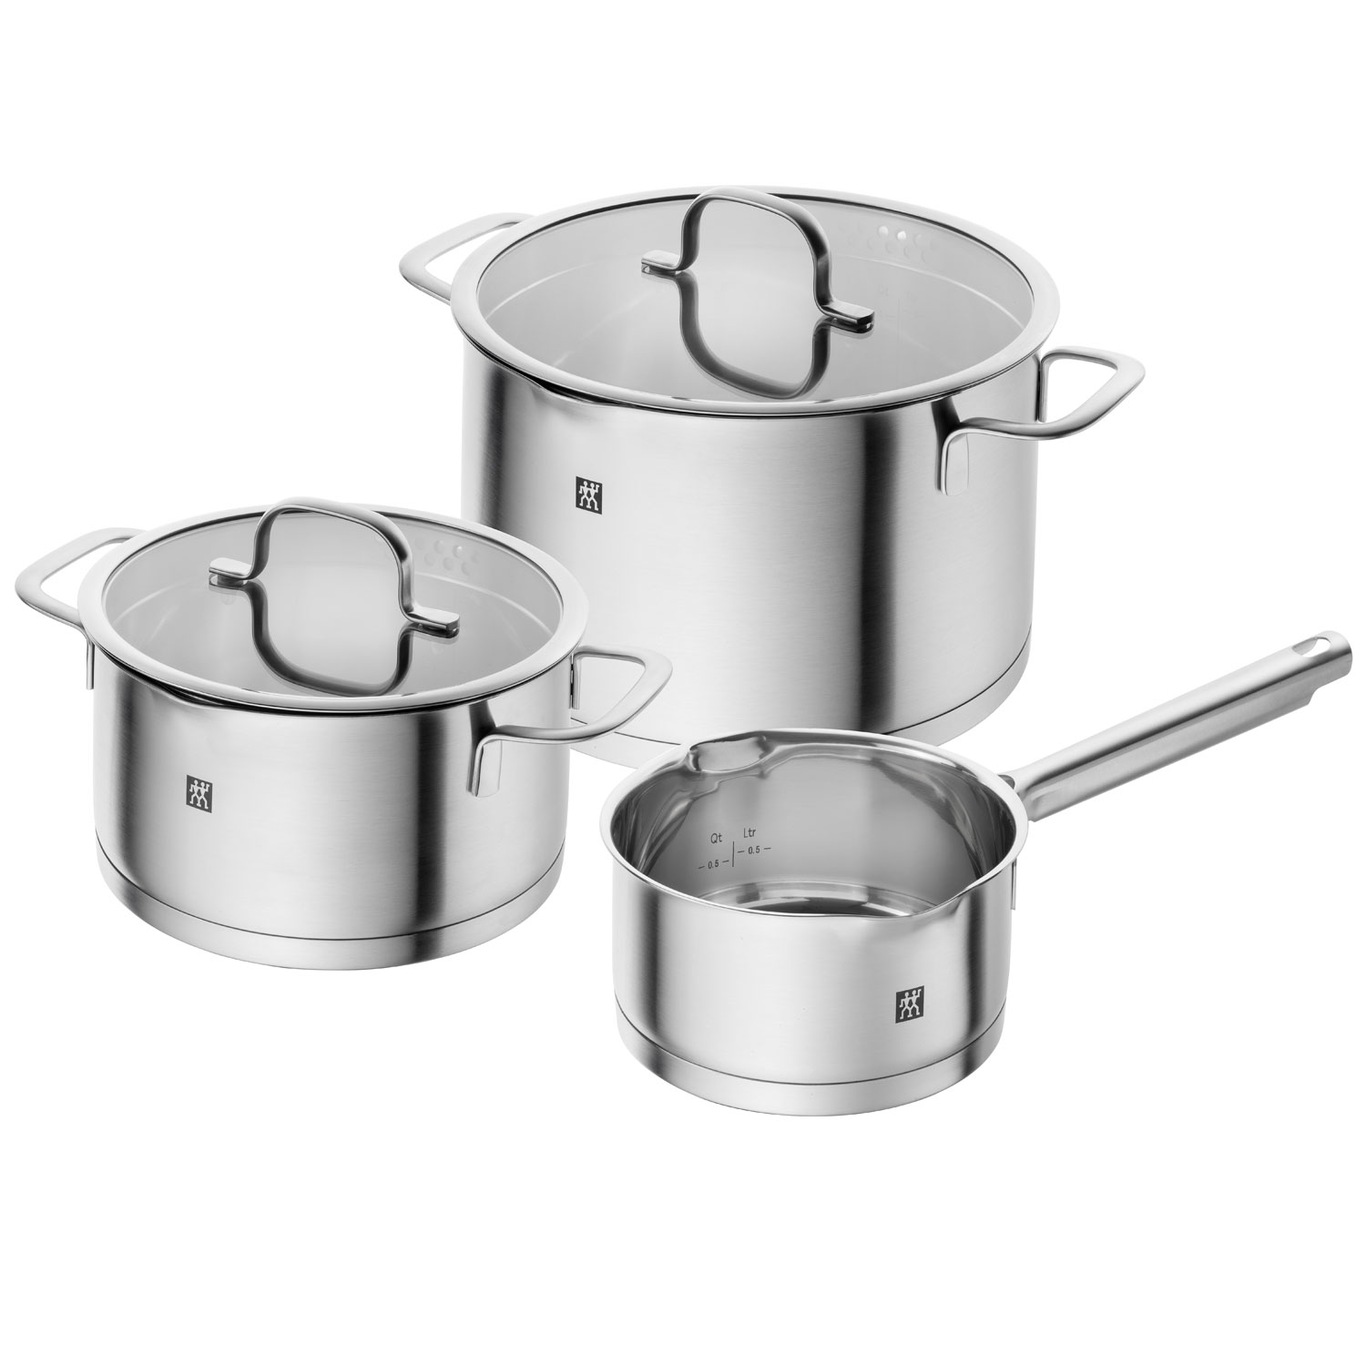 https://royaldesign.com/image/2/zwilling-true-flow-pot-set-stainless-steel-3-pieces-0?w=800&quality=80